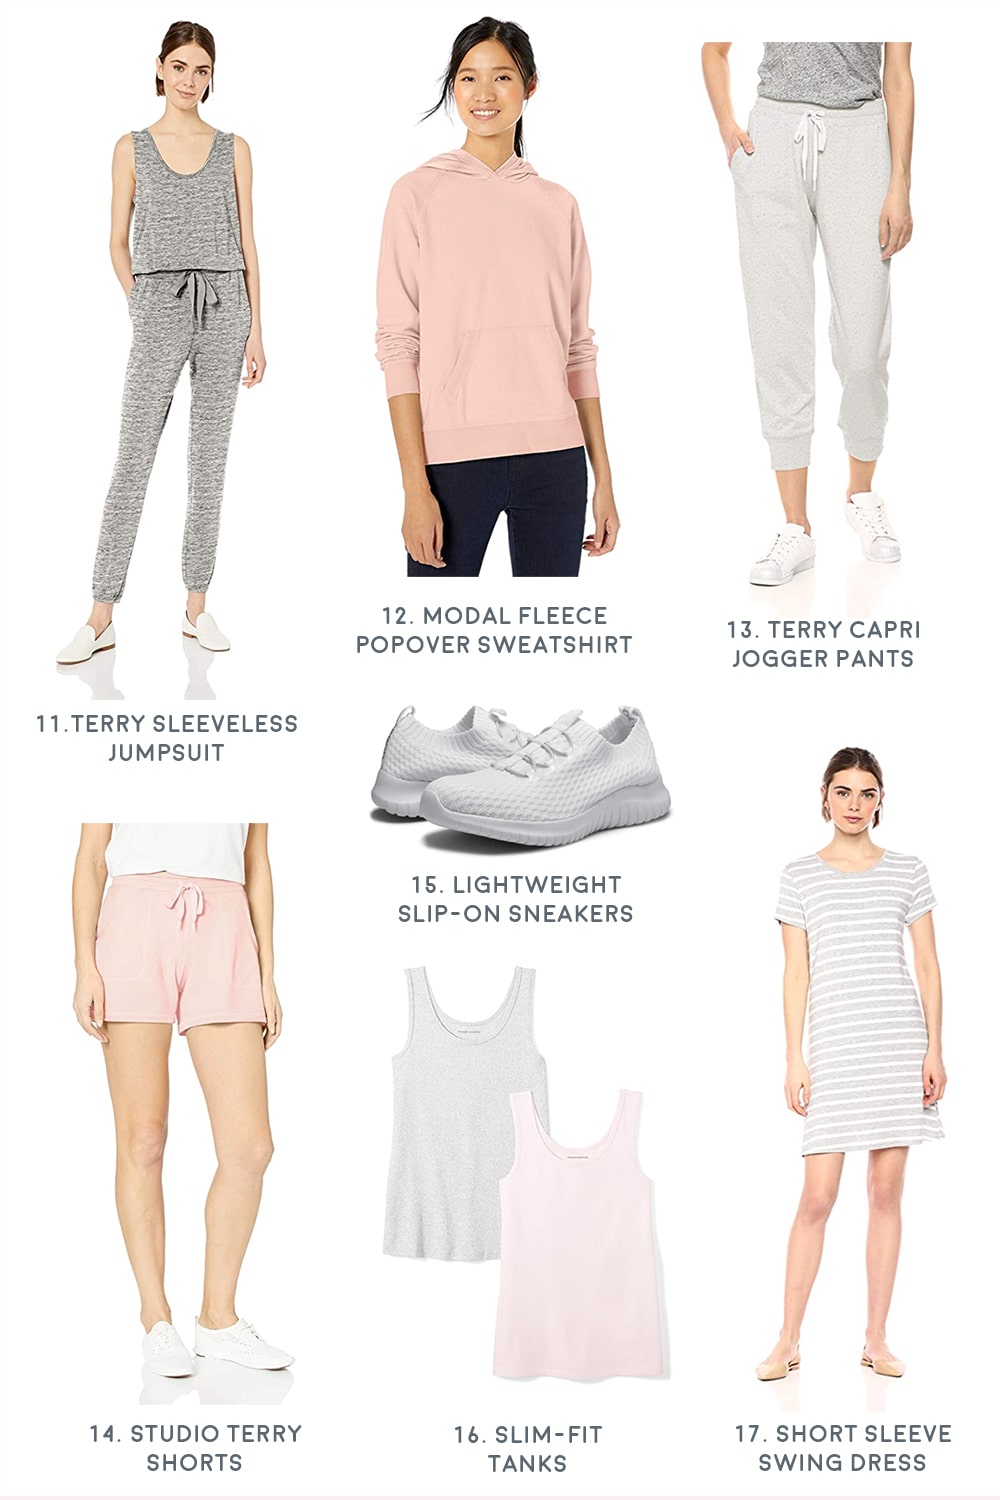 The best loungewear for women on Amazon by affordable fashion blogger Stephanie Ziajka of Diary of a Debutante